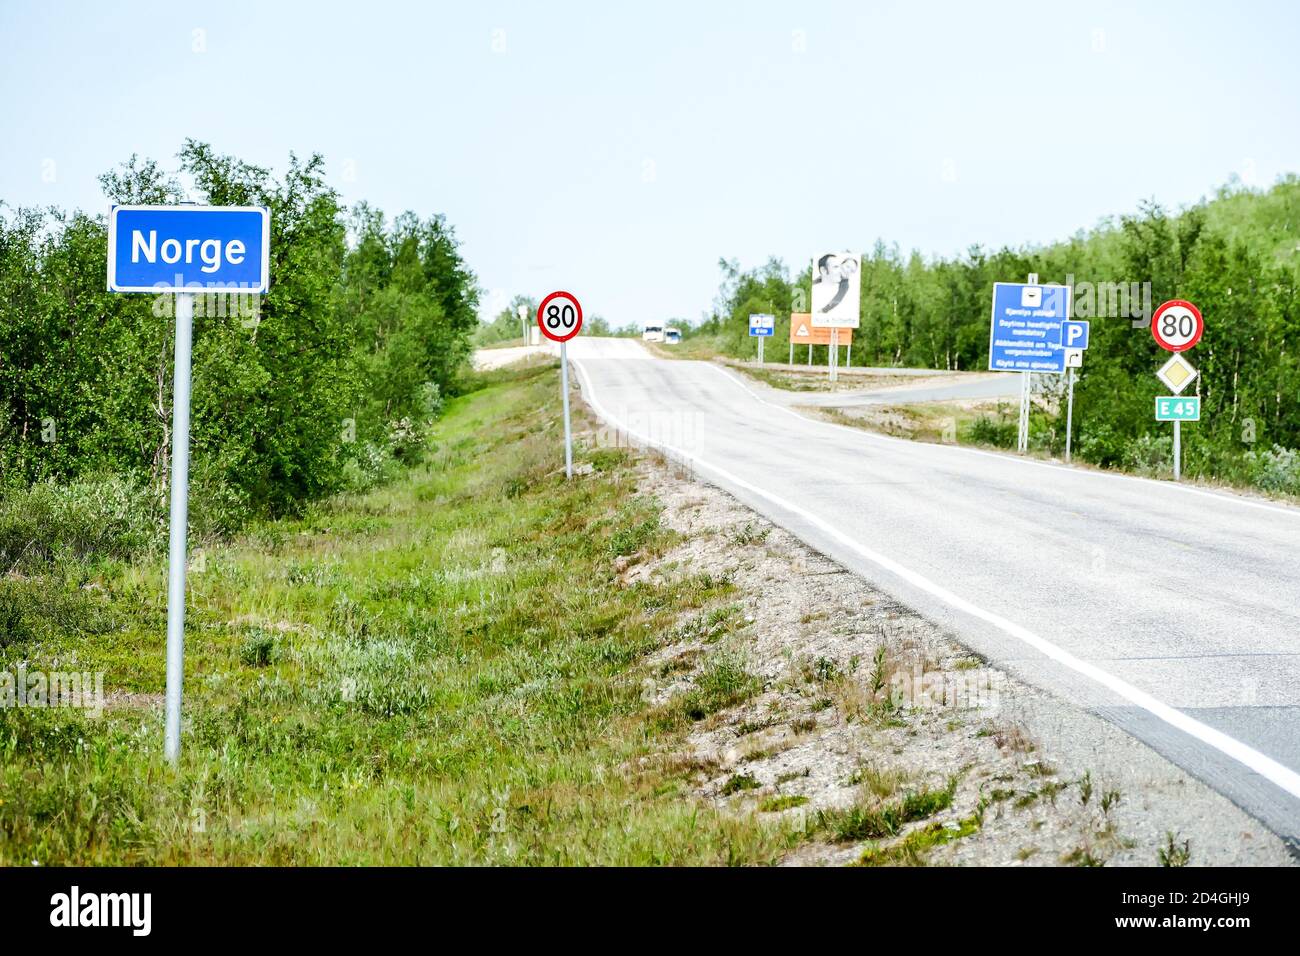 Finland Norway Street Sign in Border between Norway and Finland Stock Photo  - Alamy